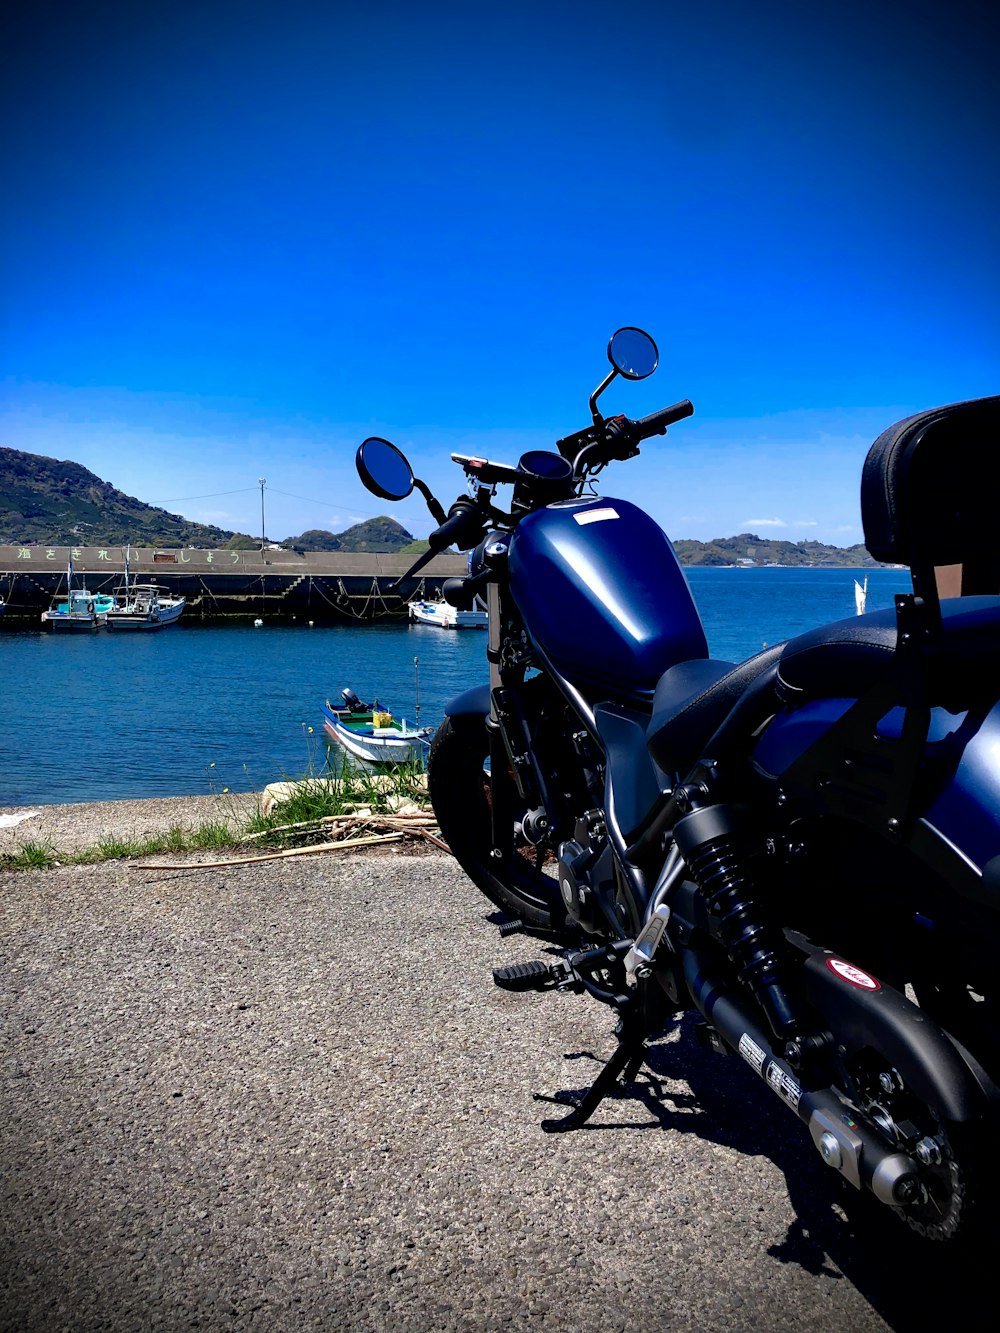 black and silver cruiser motorcycle parked beside body of water during daytime